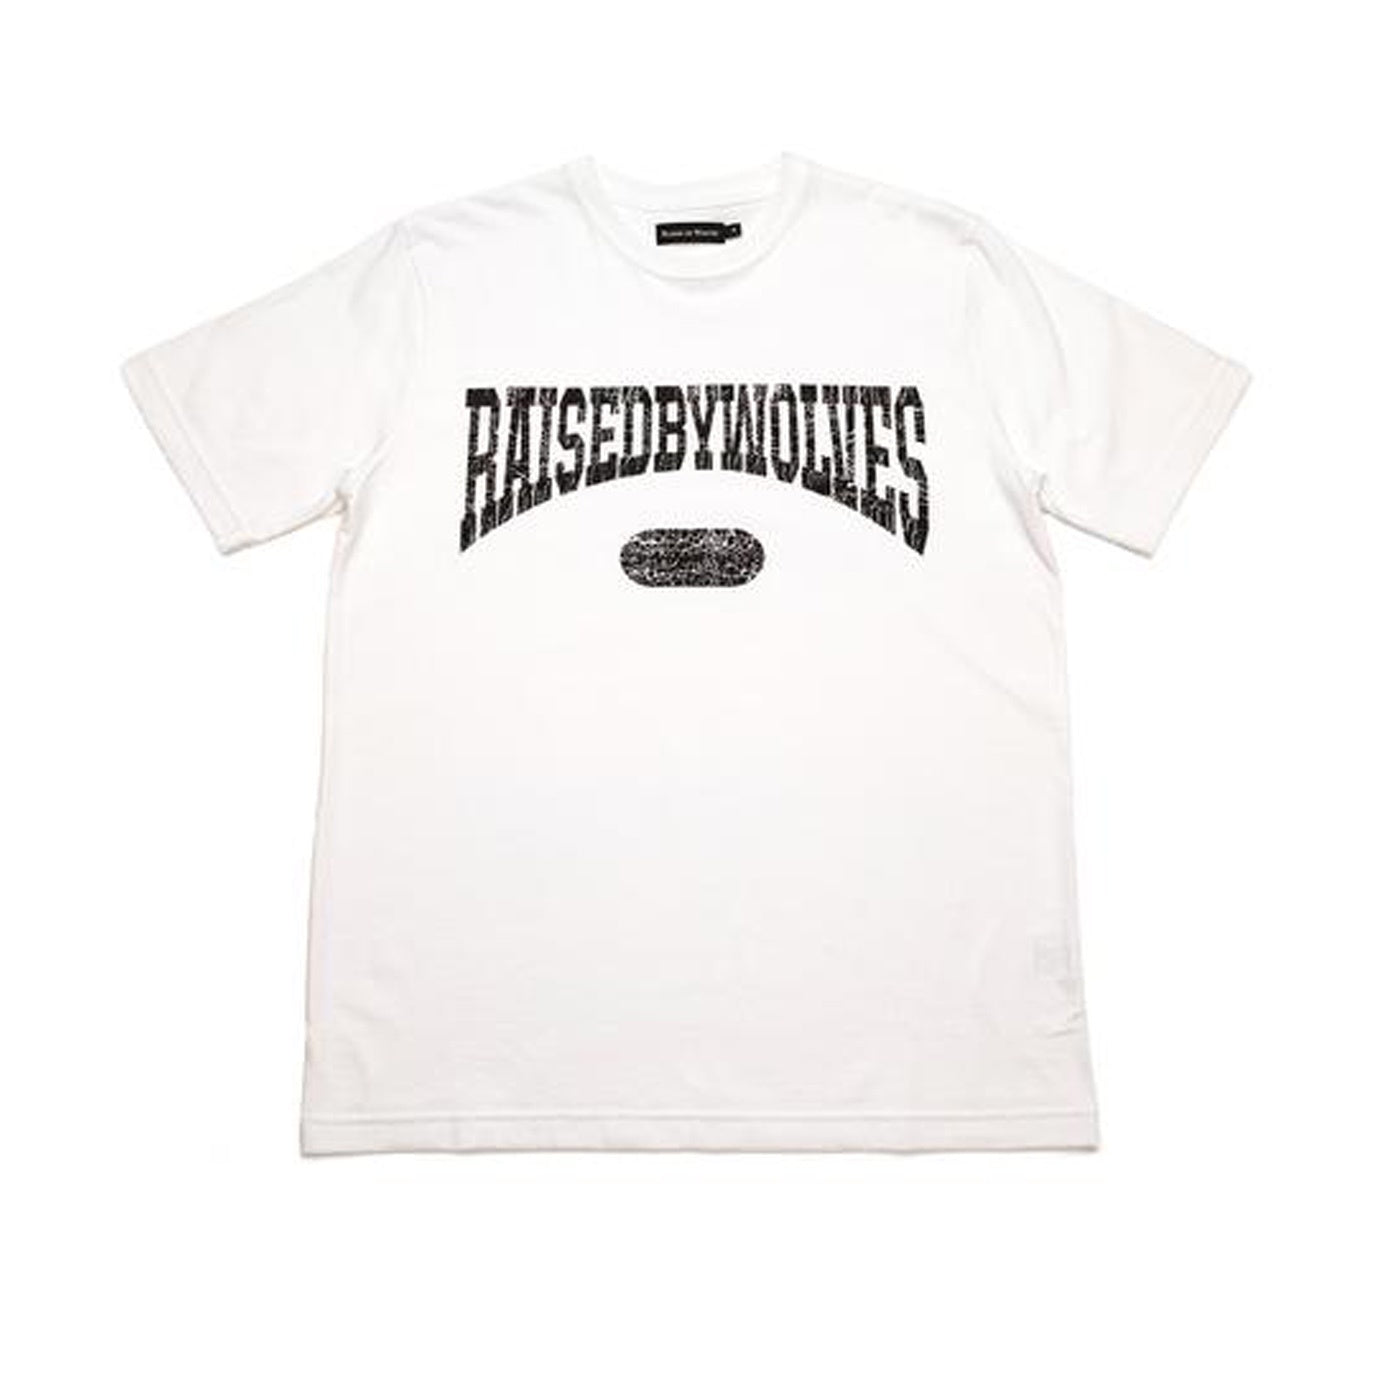 Raised by Wolves Sports Tee White